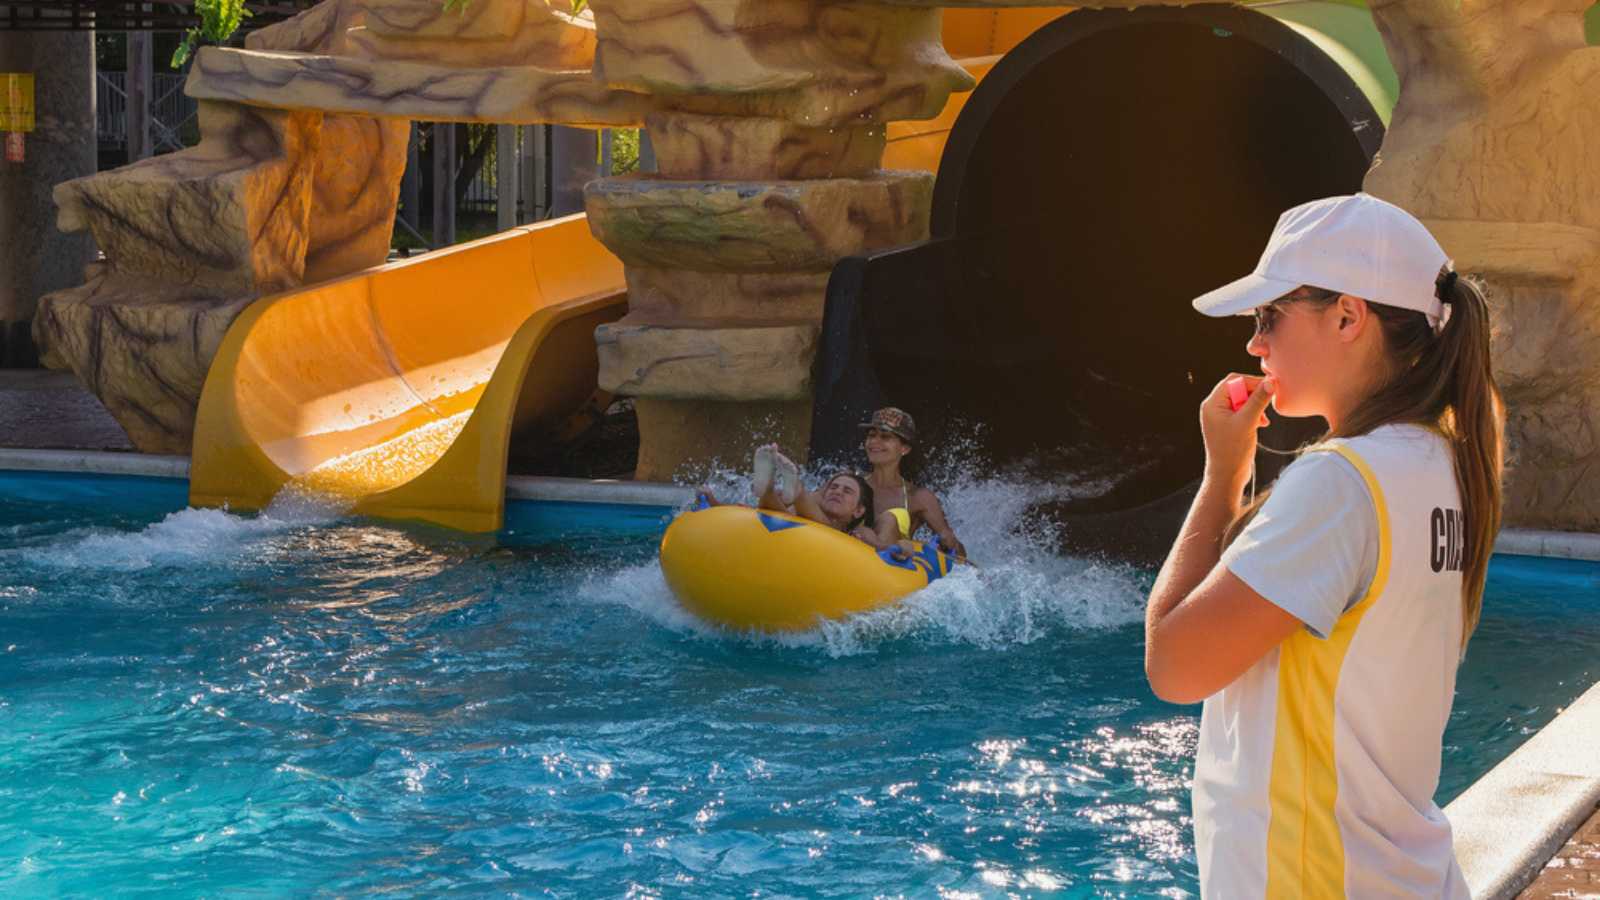 A lifeguard girl watches people having fun in a water park.